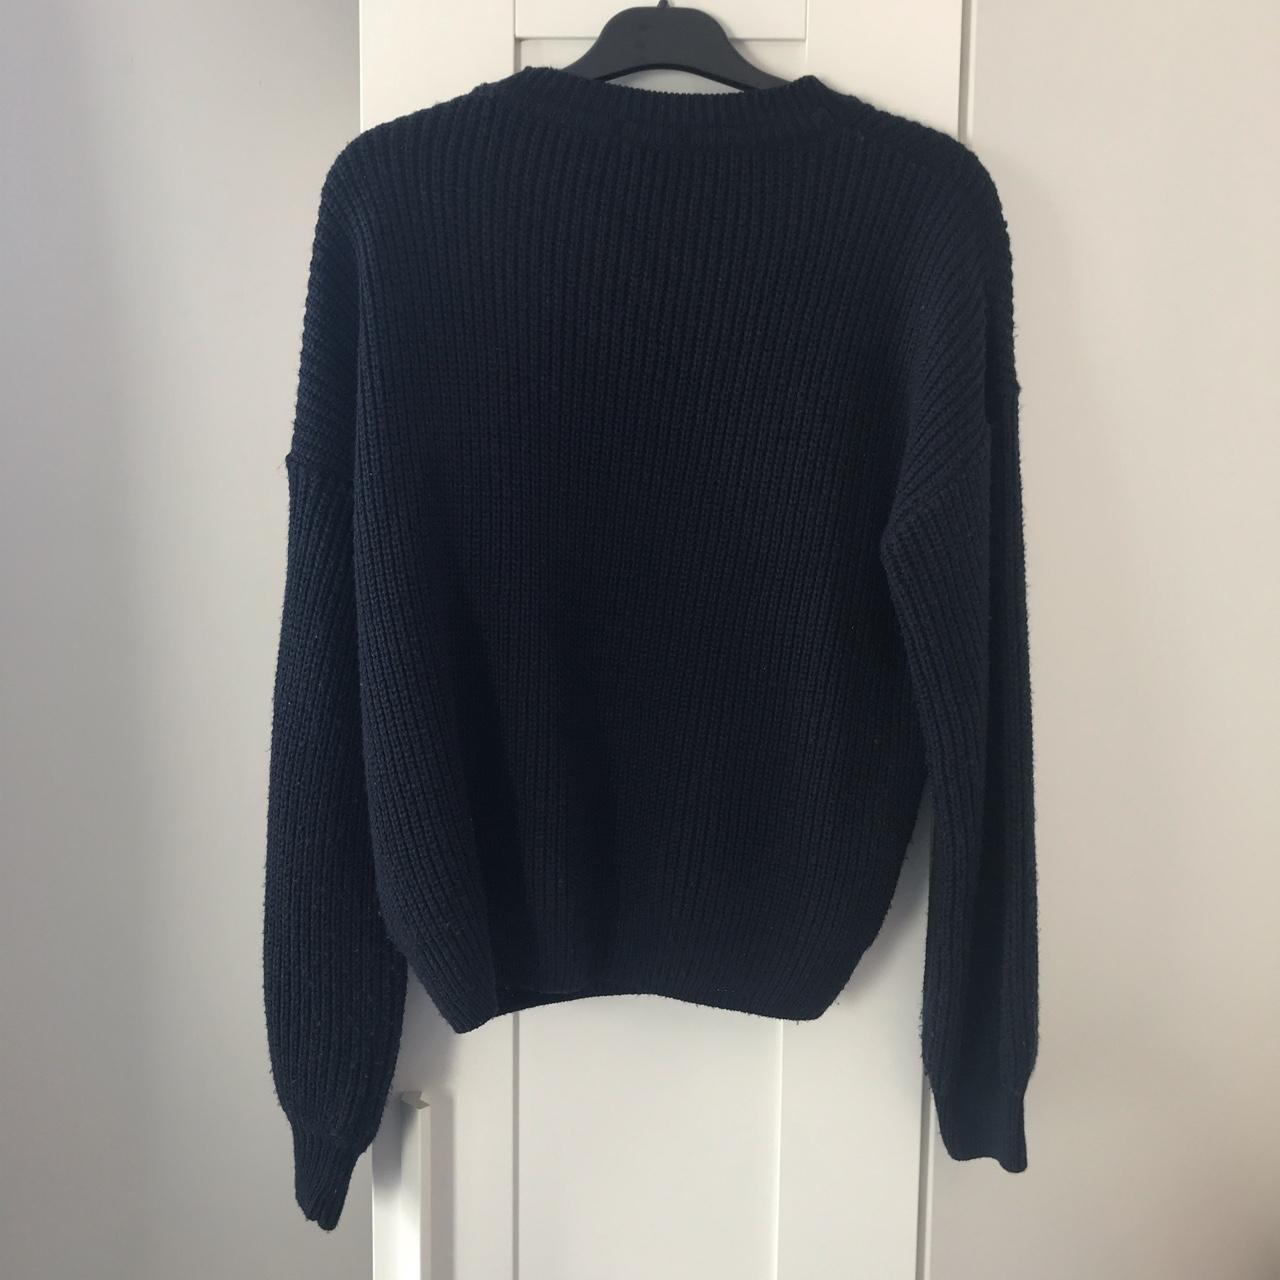 Product Image 2 - TOPSHOP navy blue chunky knitted